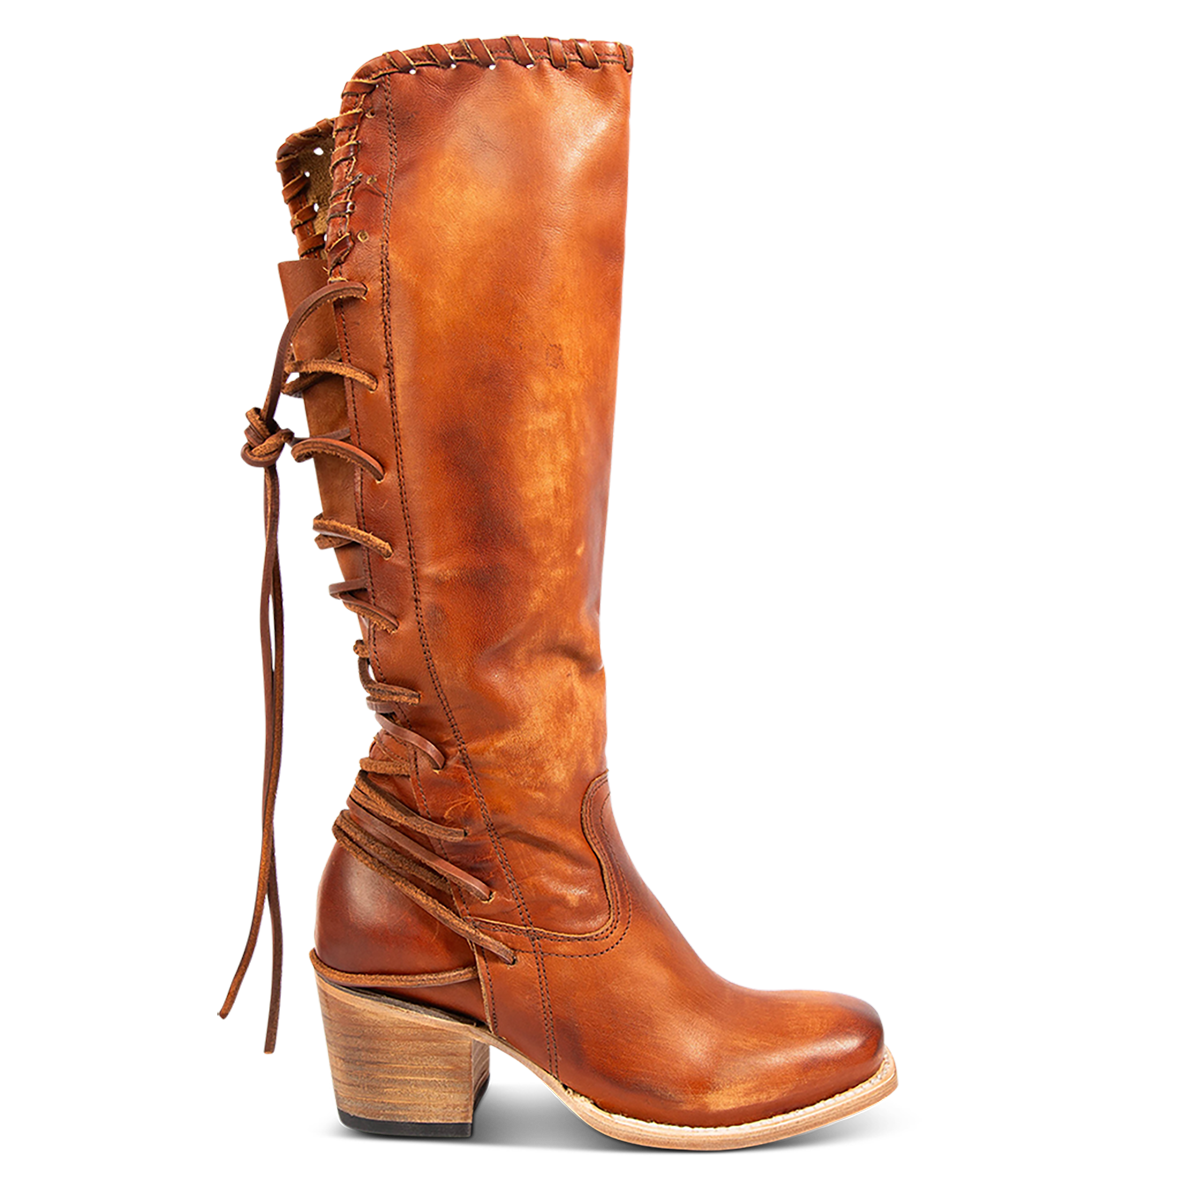 FREEBIRD women's Dillon whiskey leather boot with 100% full grain leather, whip stitch edge detailing and adjustable back leather lacing